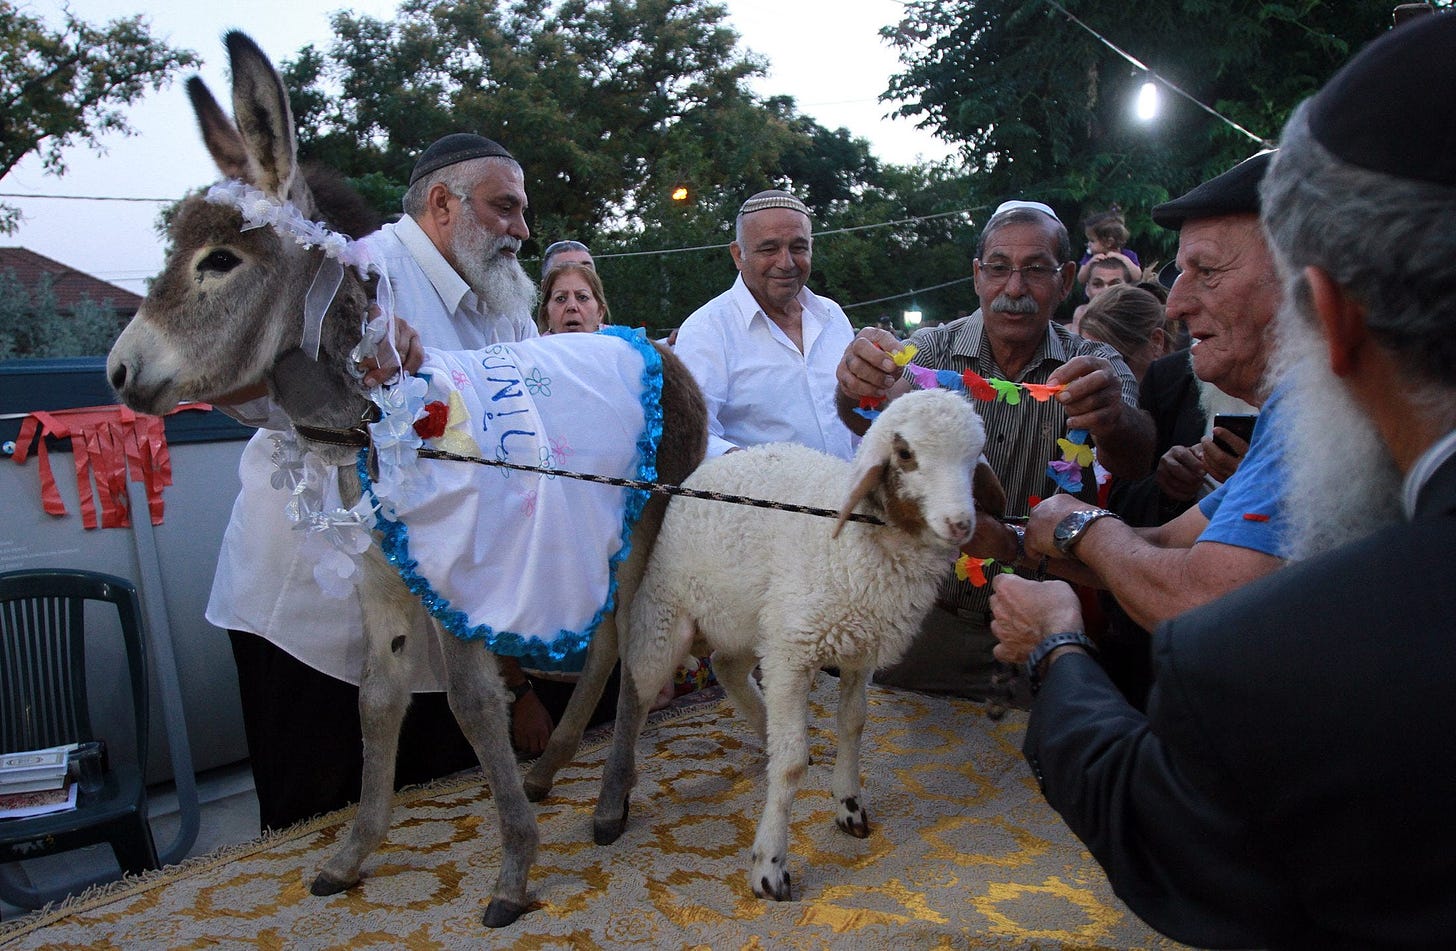 At a Rare Jewish Ceremony, a Donkey Gets to Be King for a Day - Haaretz Com  - Haaretz.com